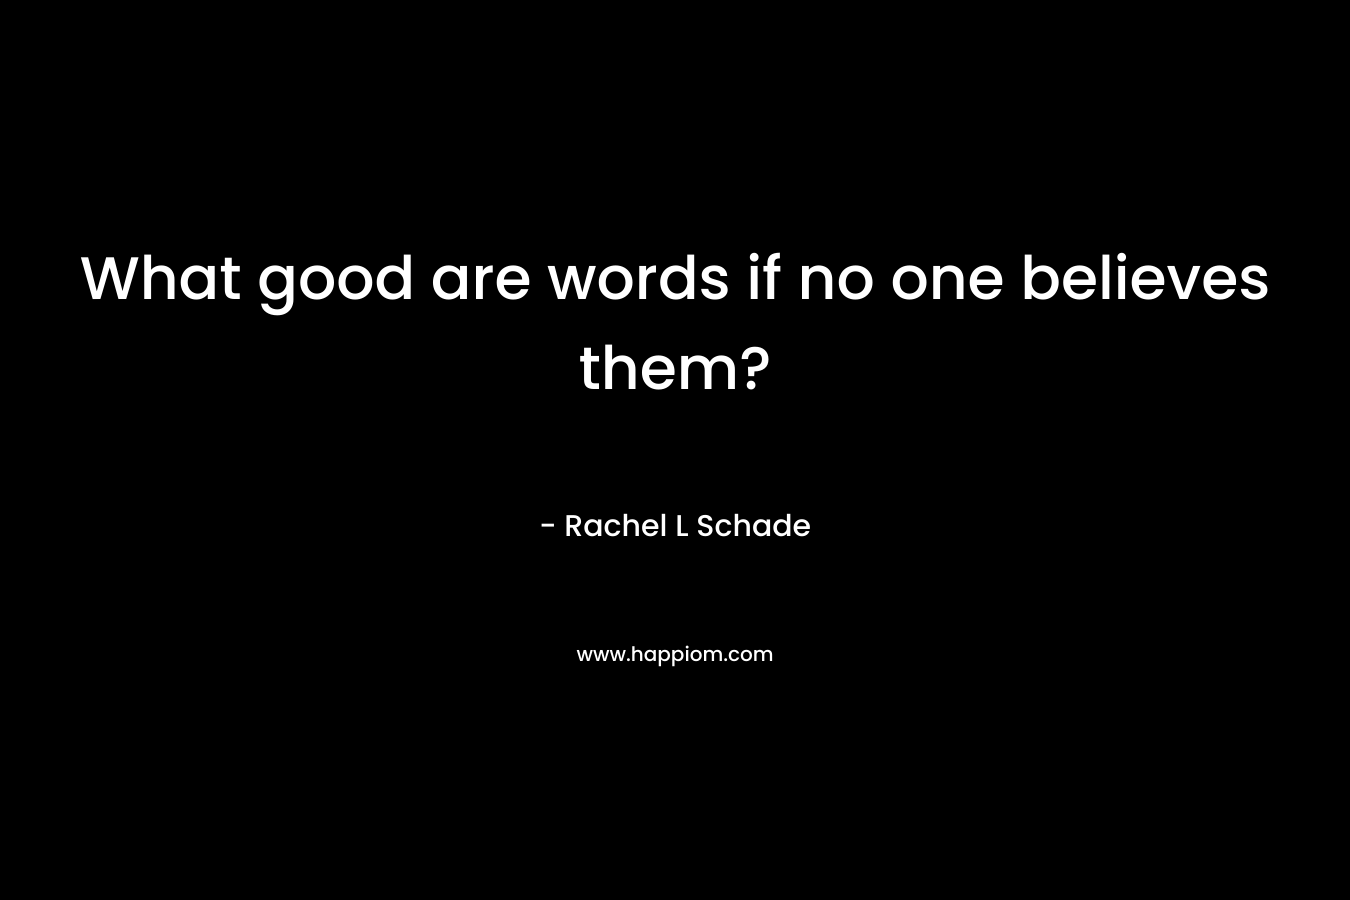 What good are words if no one believes them?